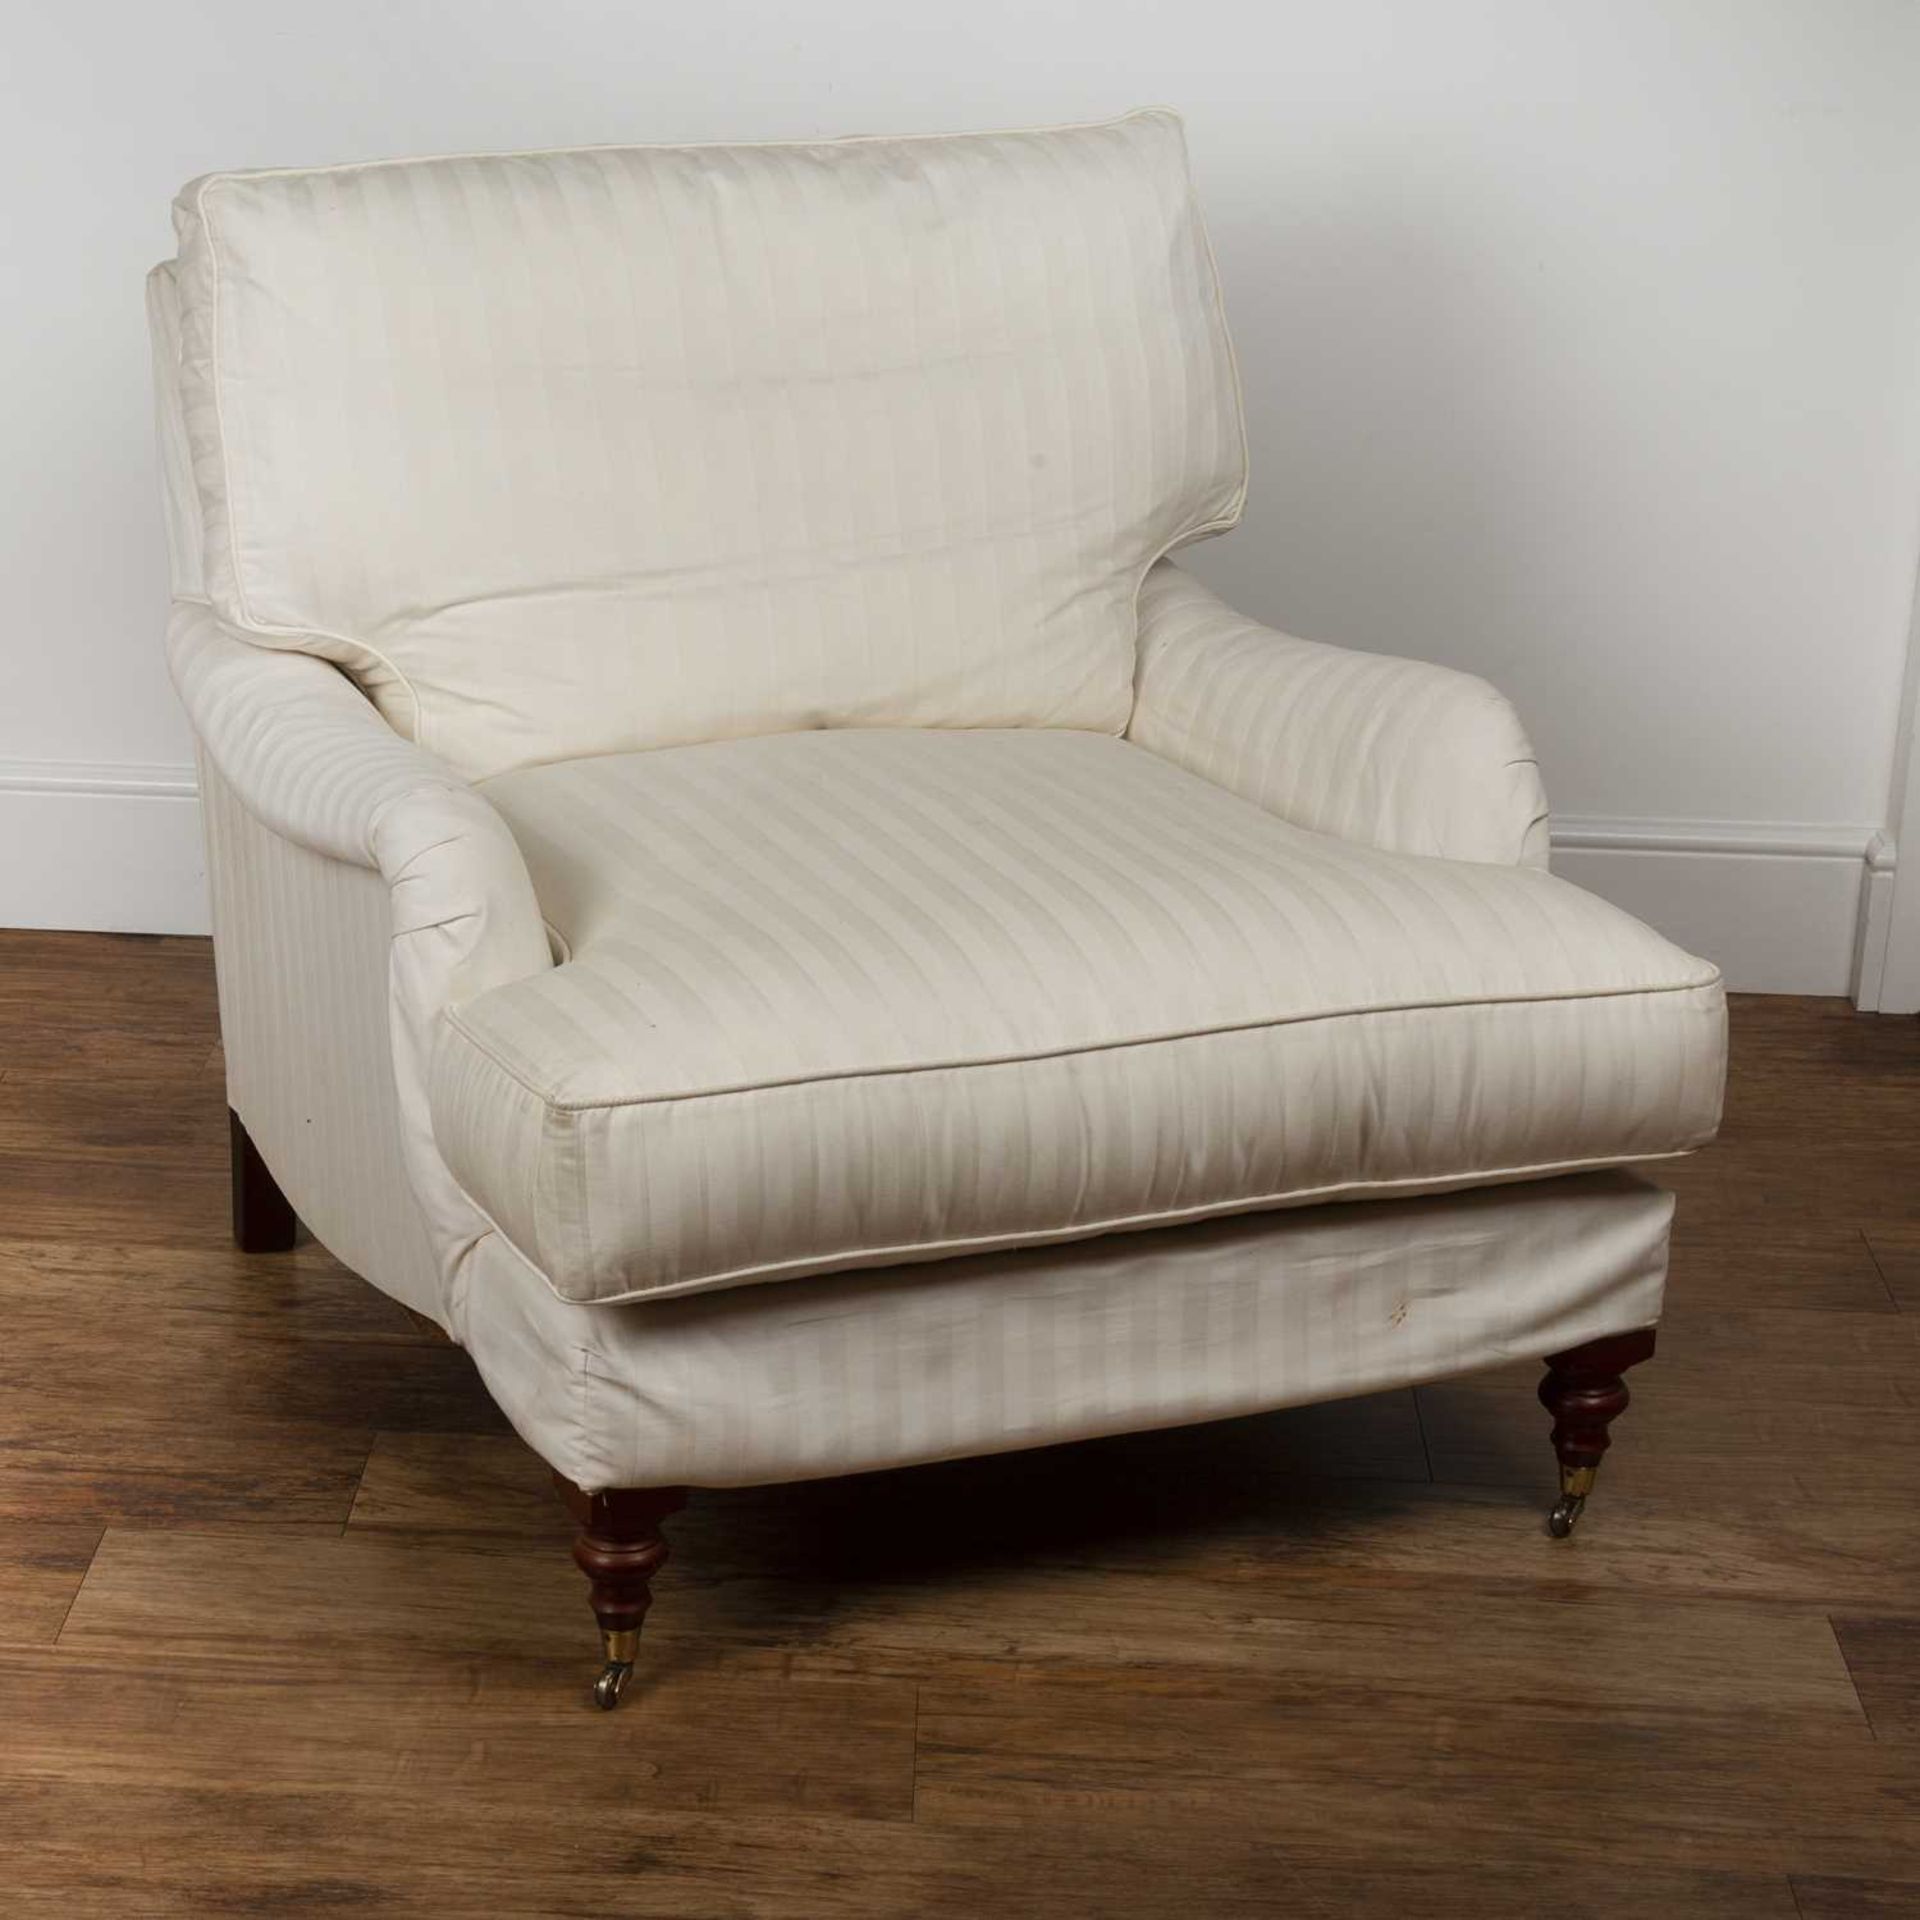 Howard style armchair Contemporary, with white striped upholstery, on brass castors, 86cm wide